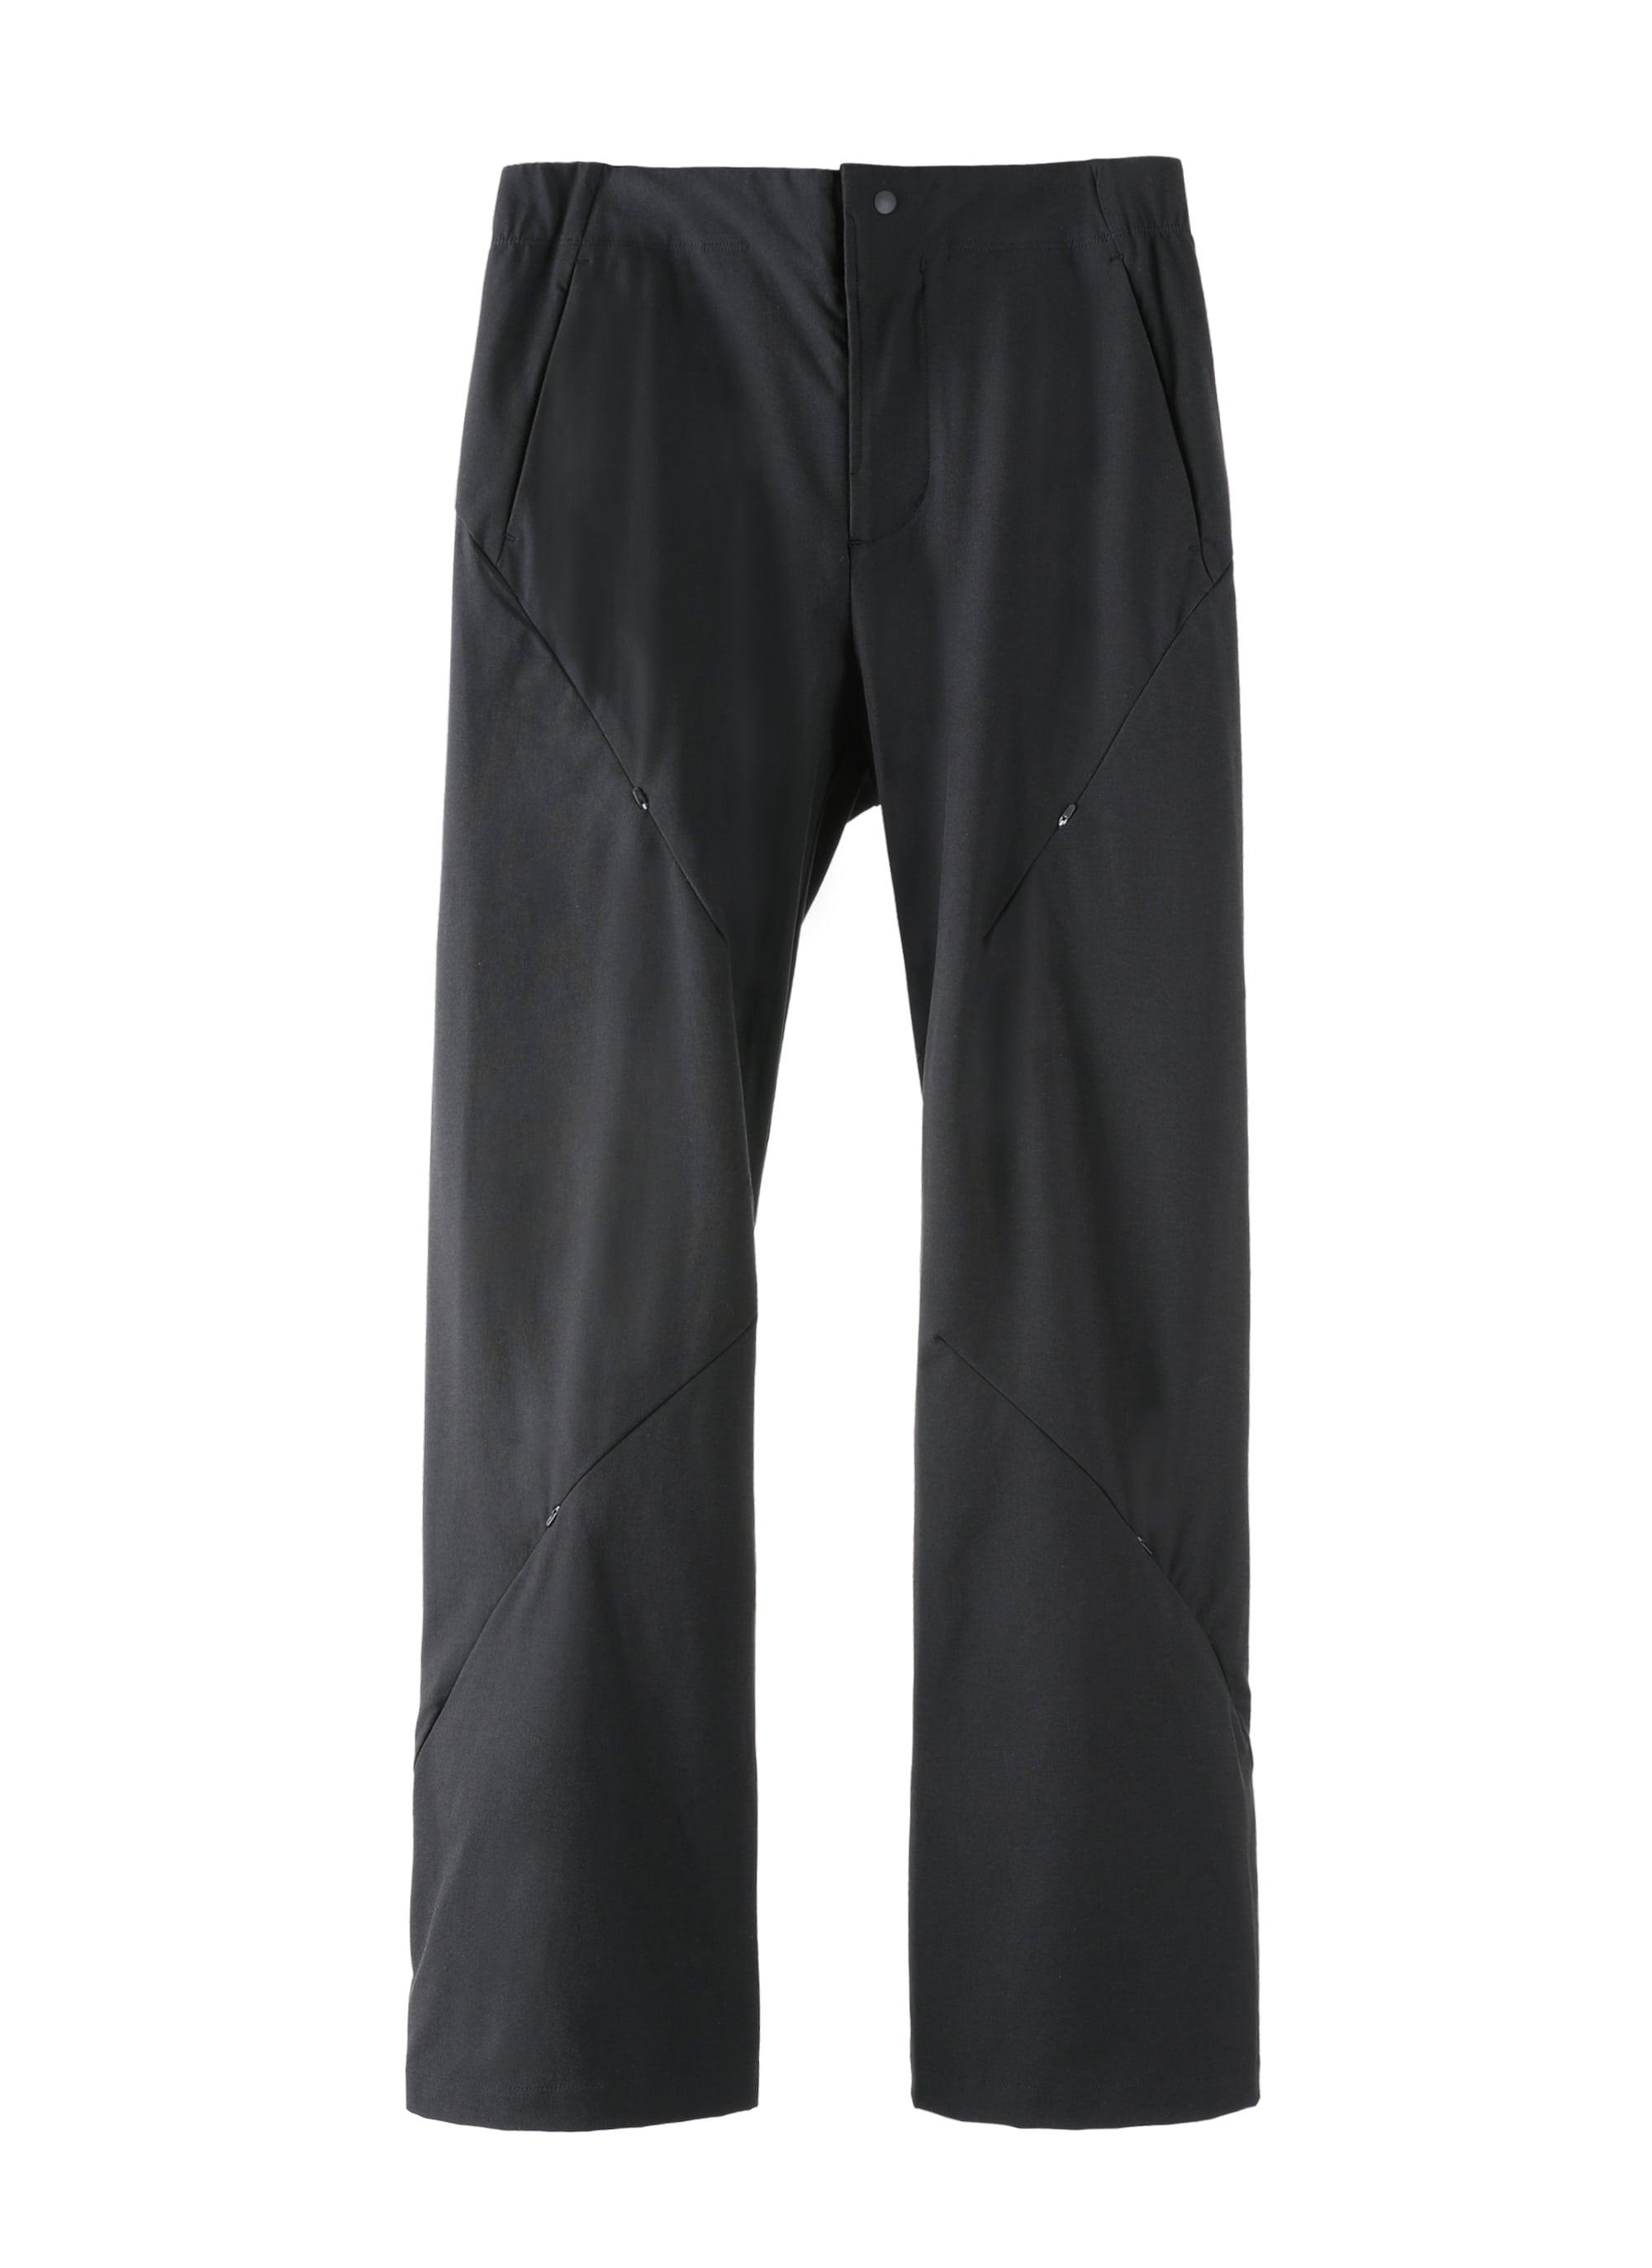 POST ARCHIVE FACTION - 5.1 Technical Pants Right -  (Black) by POST ARCHIVE FACTION (PAF)